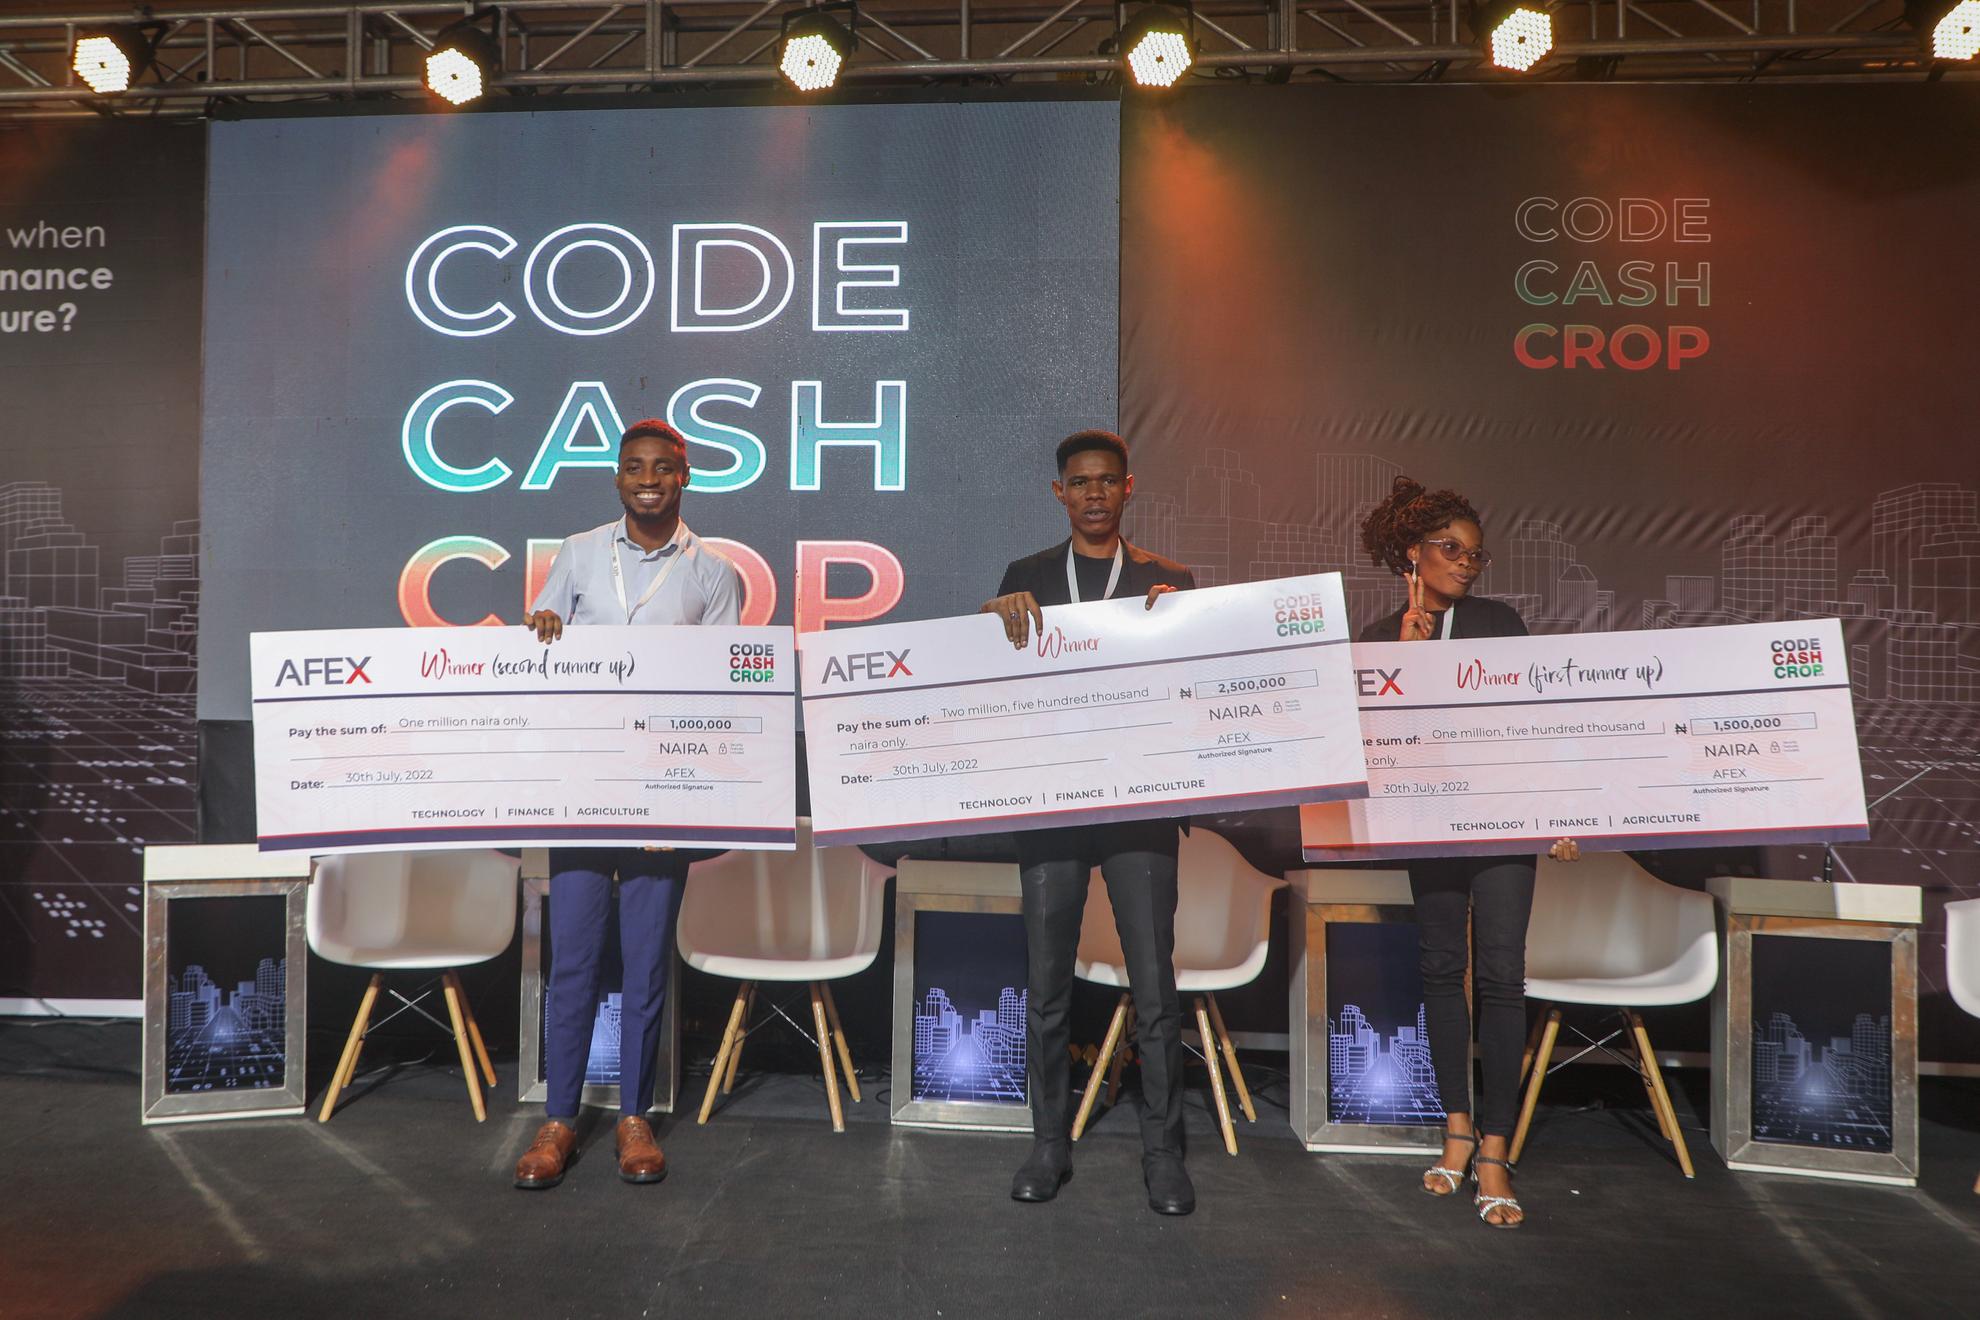 How Ma’aji can solve farmers’ challenges – Prince Achoja, Winner of Code Cash Crop 3.0